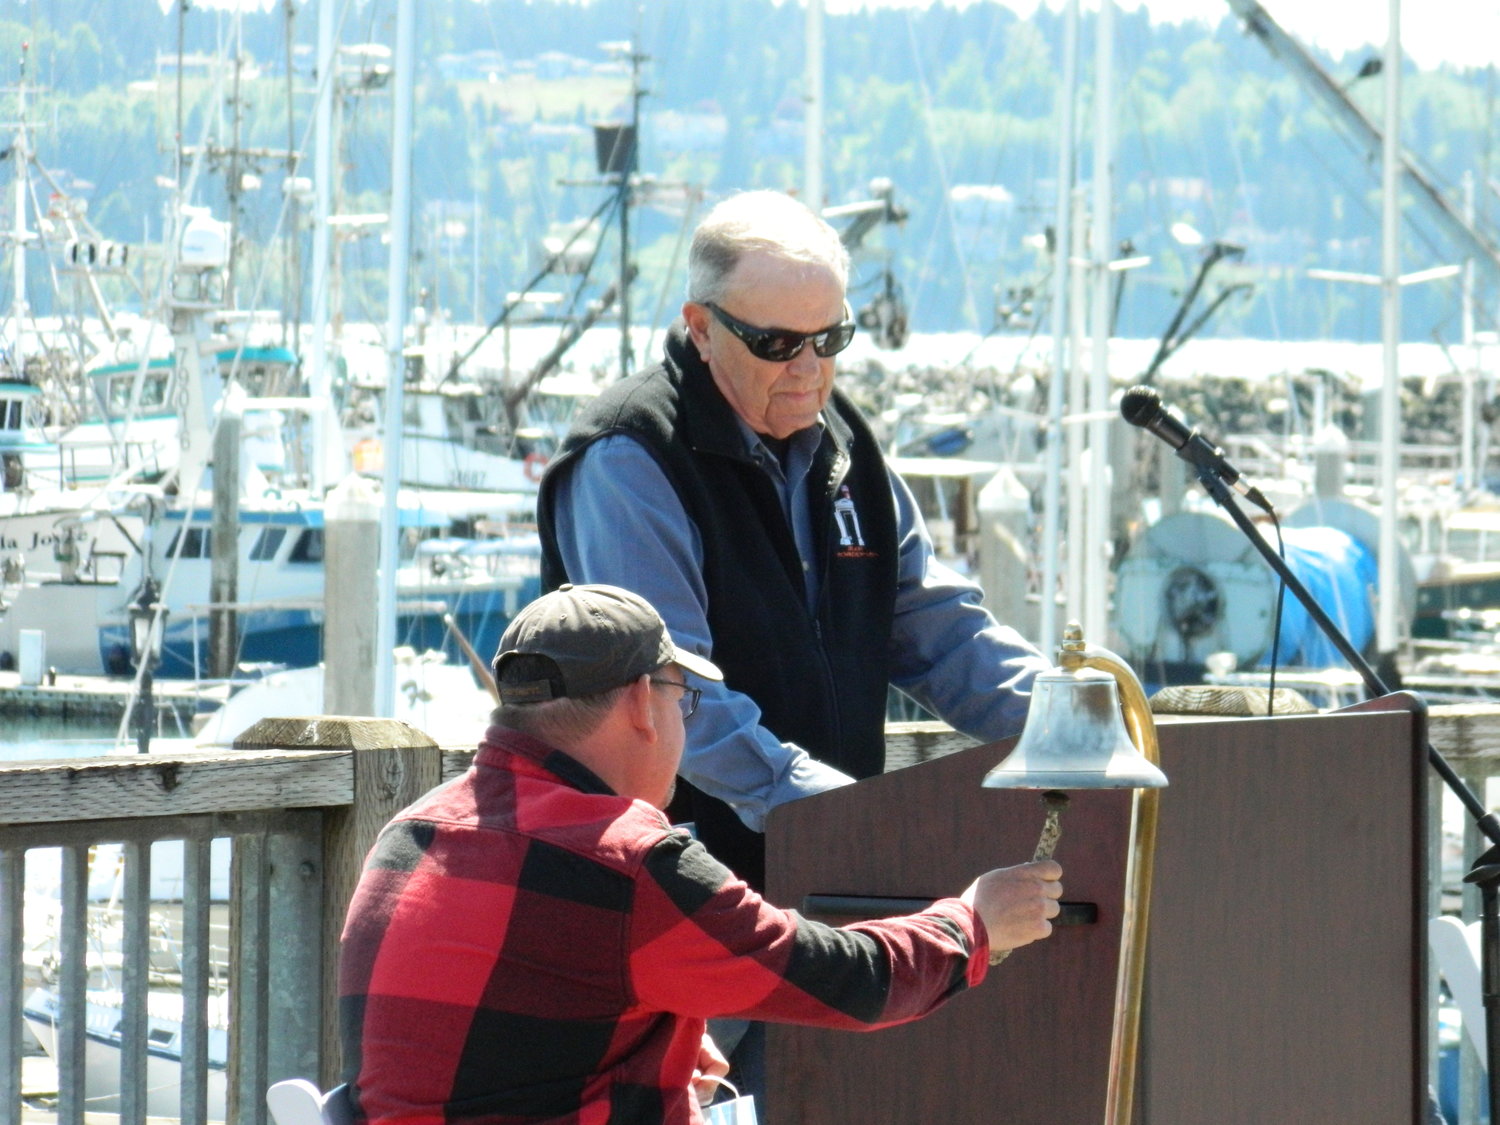 Gary Dunster watches as Jason Burk rings the bell during the 2021 Blessing of the Fleet at Blaine Harbor.